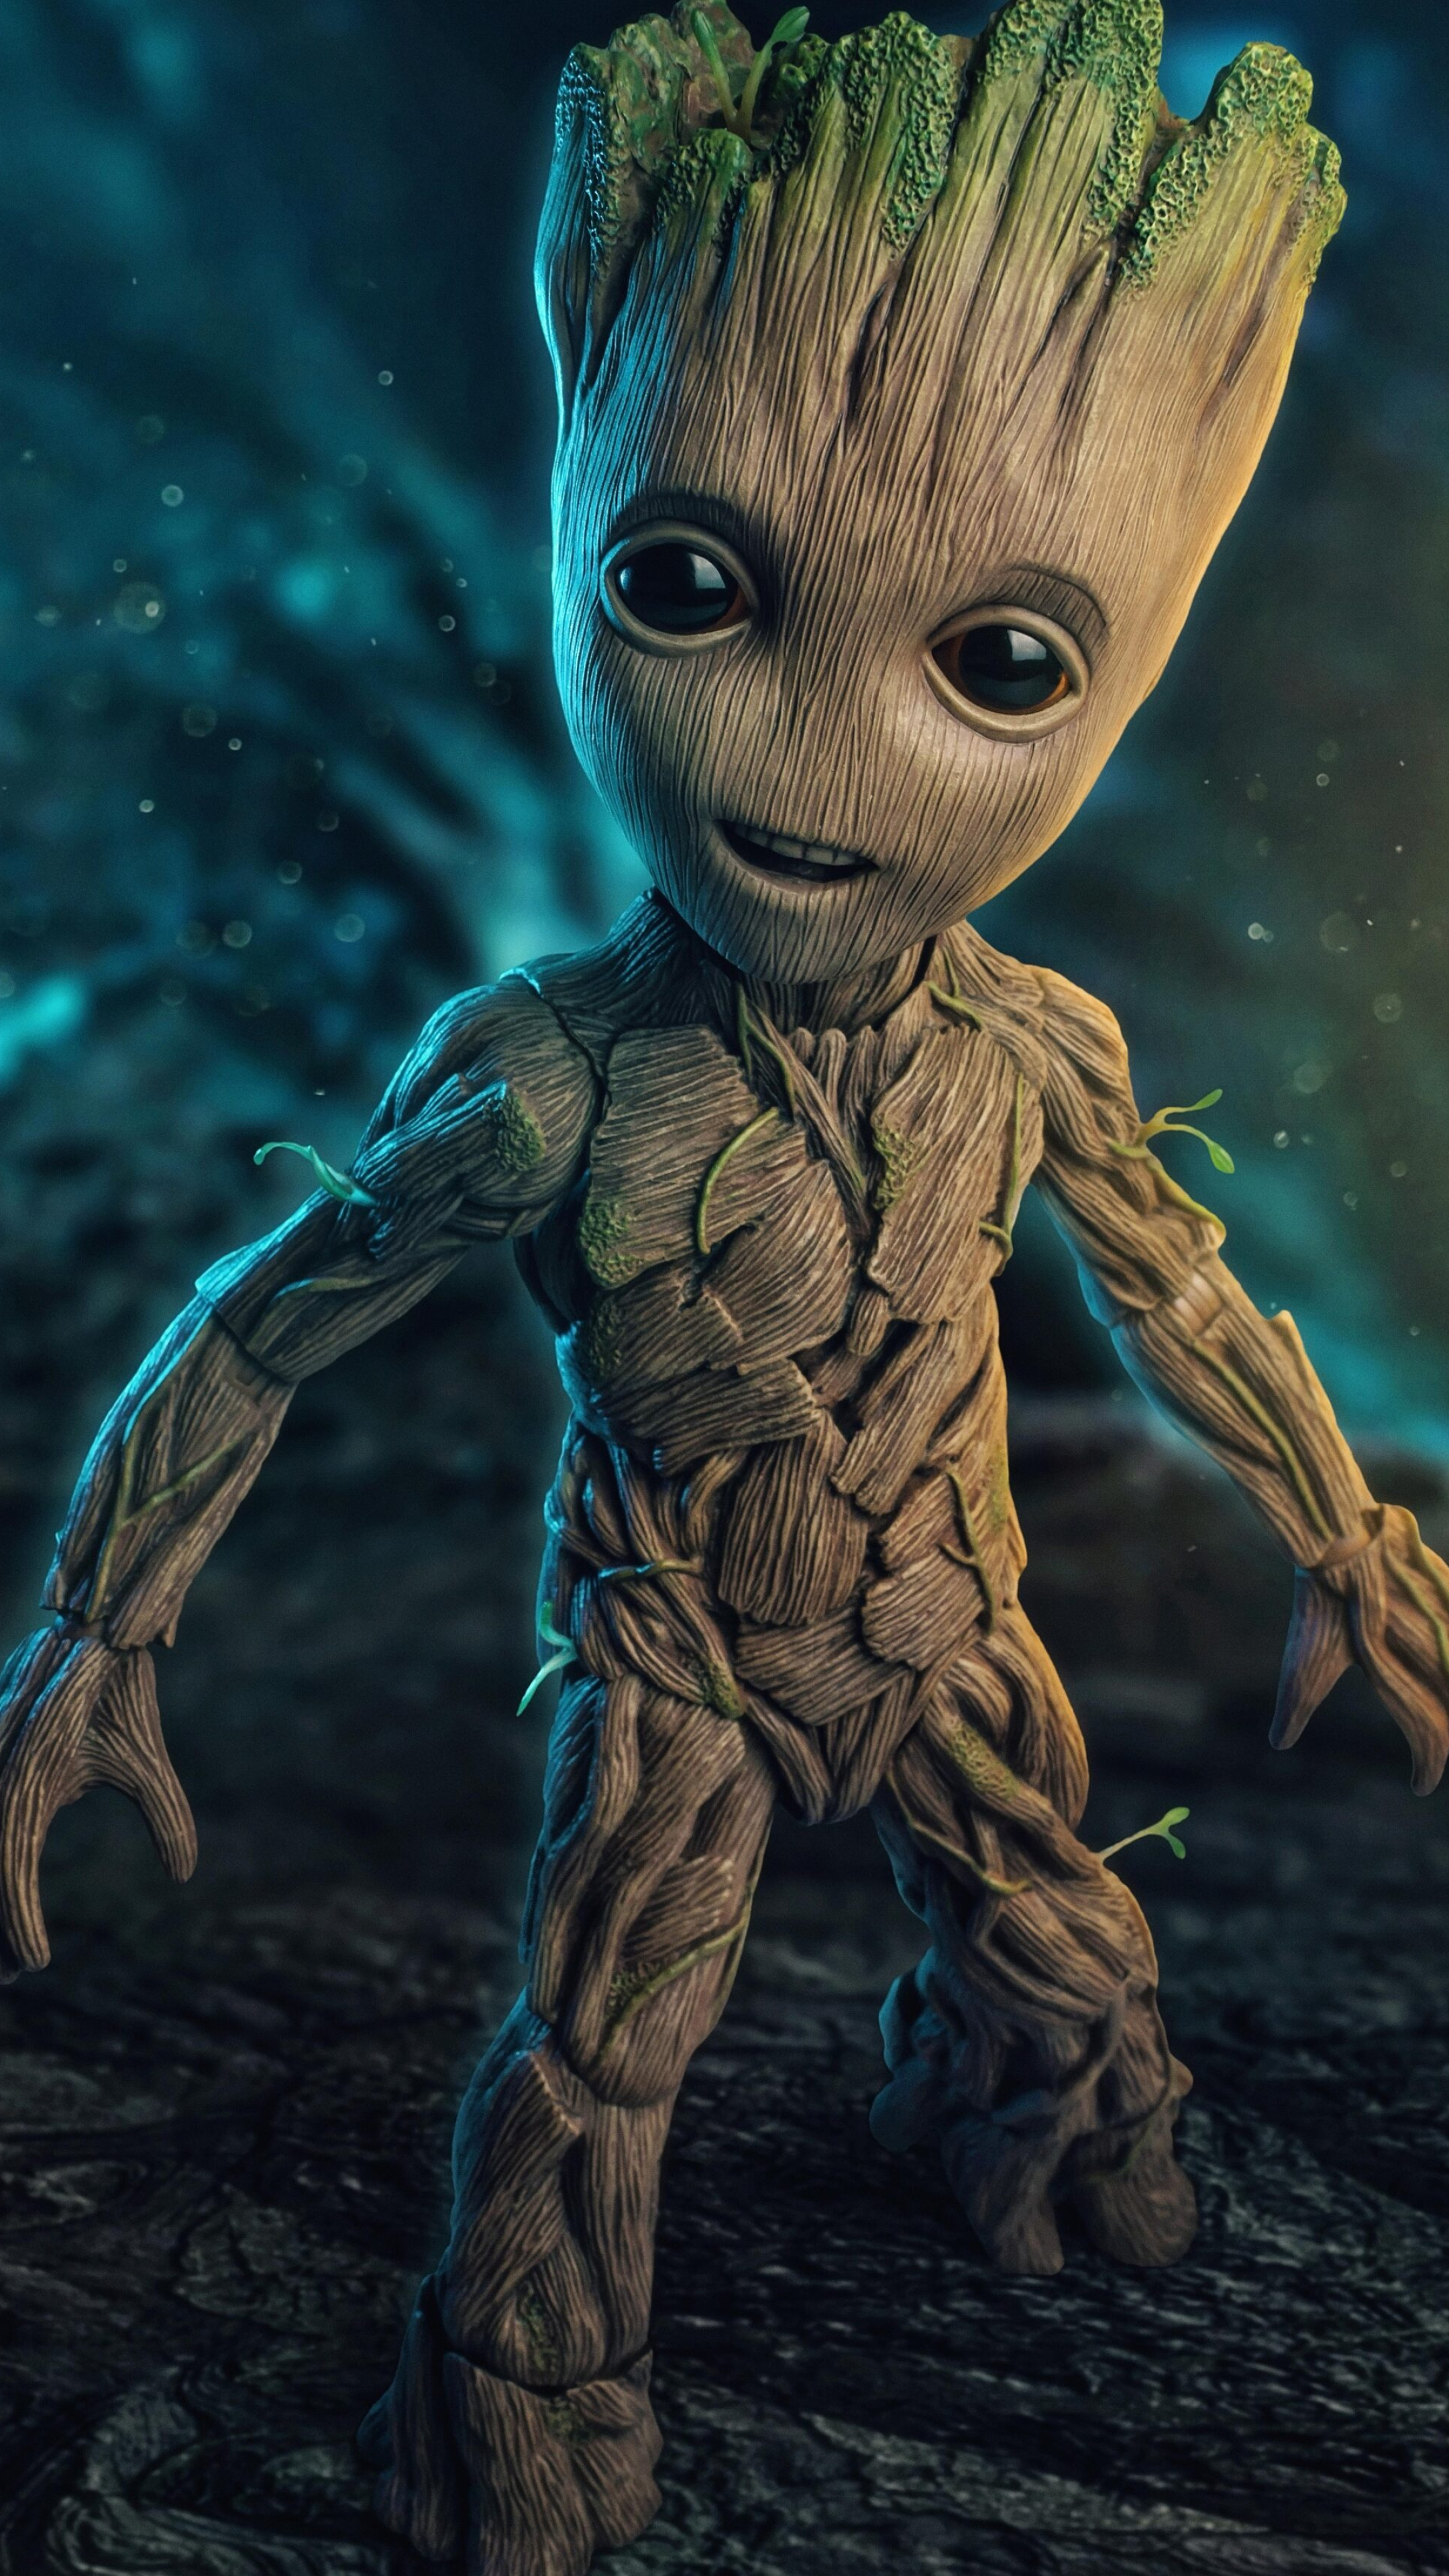 Baby Groot in 4K, 2018 Sony Xperia wallpaper, High-resolution images, Marvel superhero, 2160x3840 4K Phone